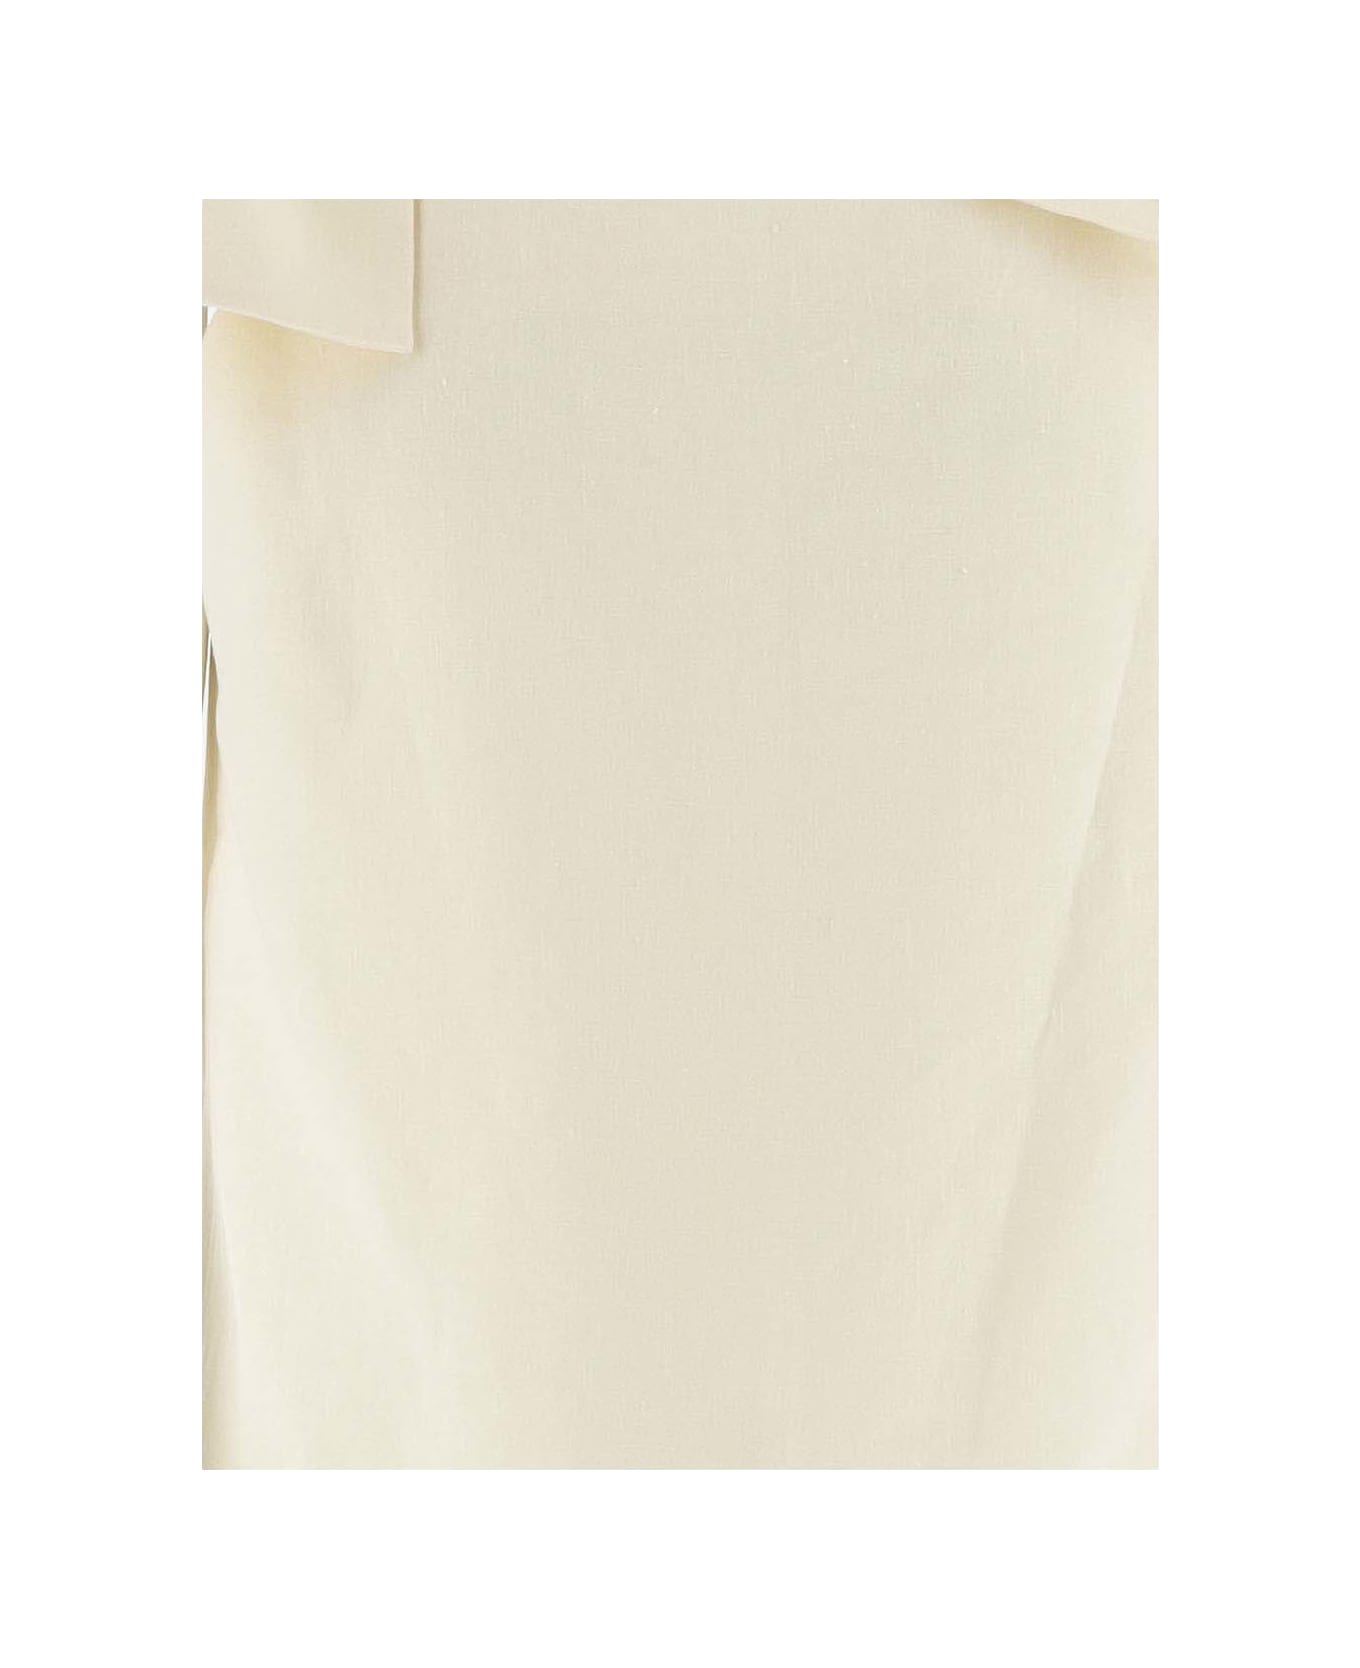 Chloé Tank Top With Bow On The Straps - White タンクトップ